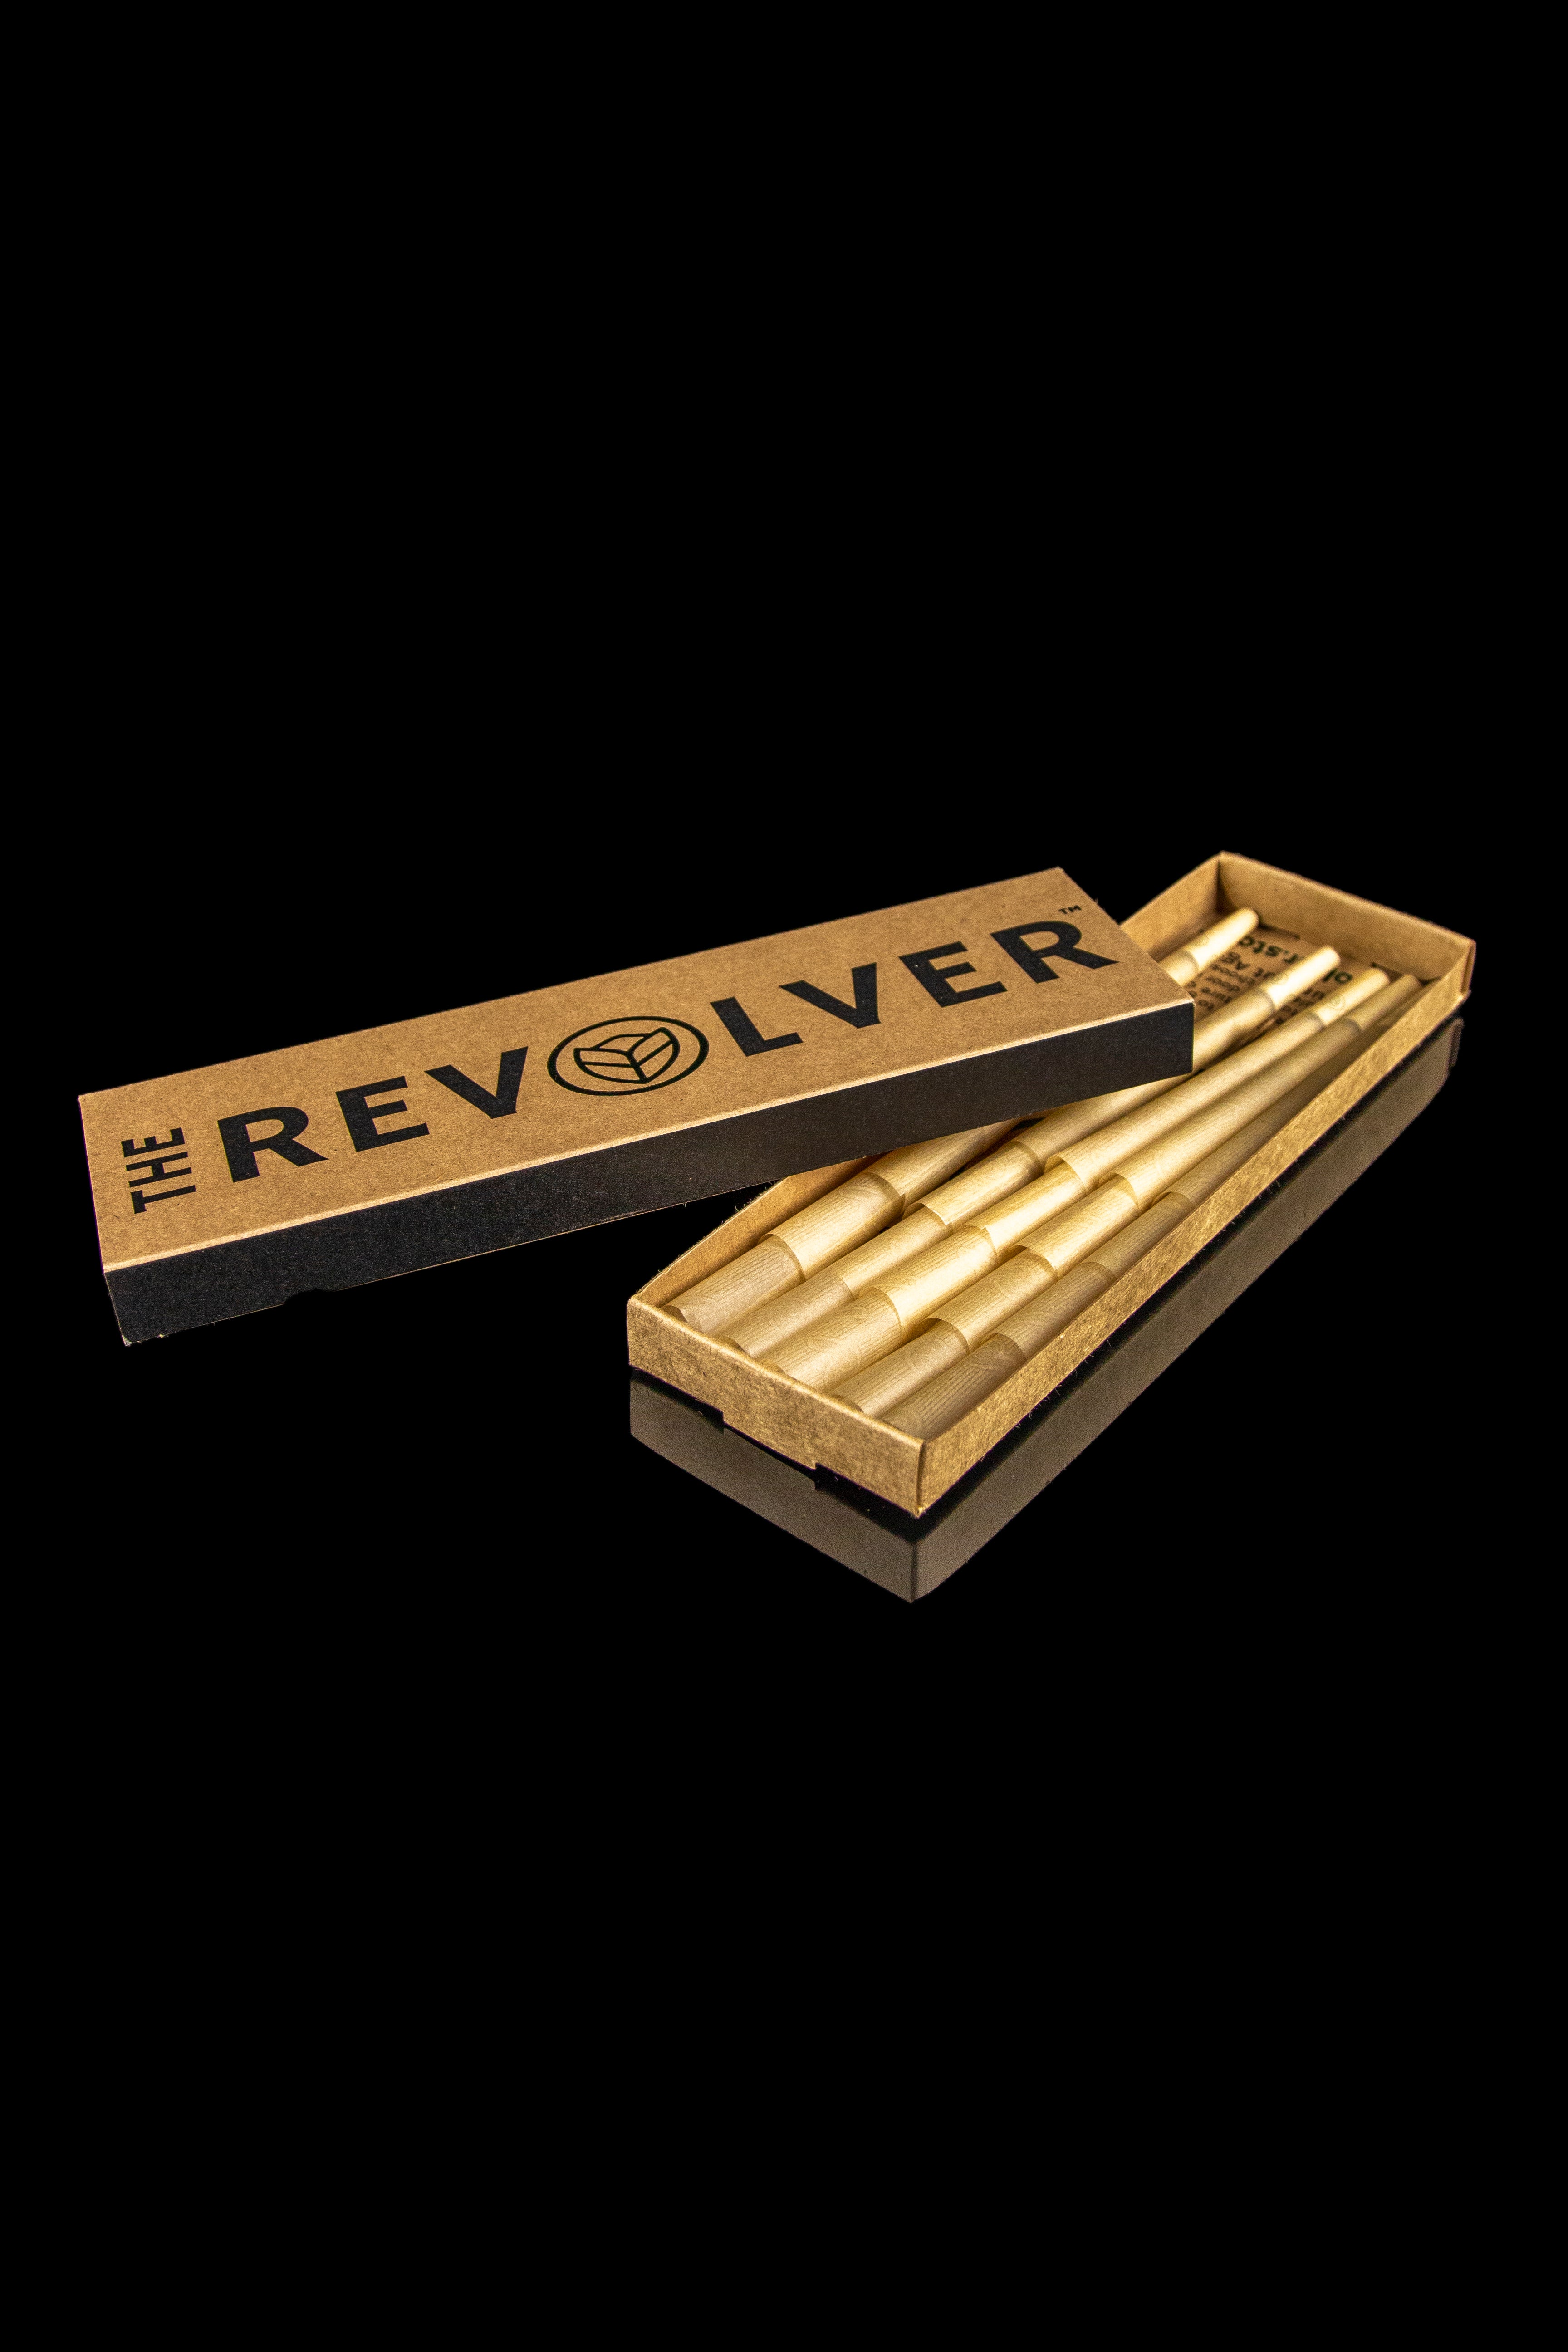 Image of The Revolver Wood Pulp Cones - Pack of 20